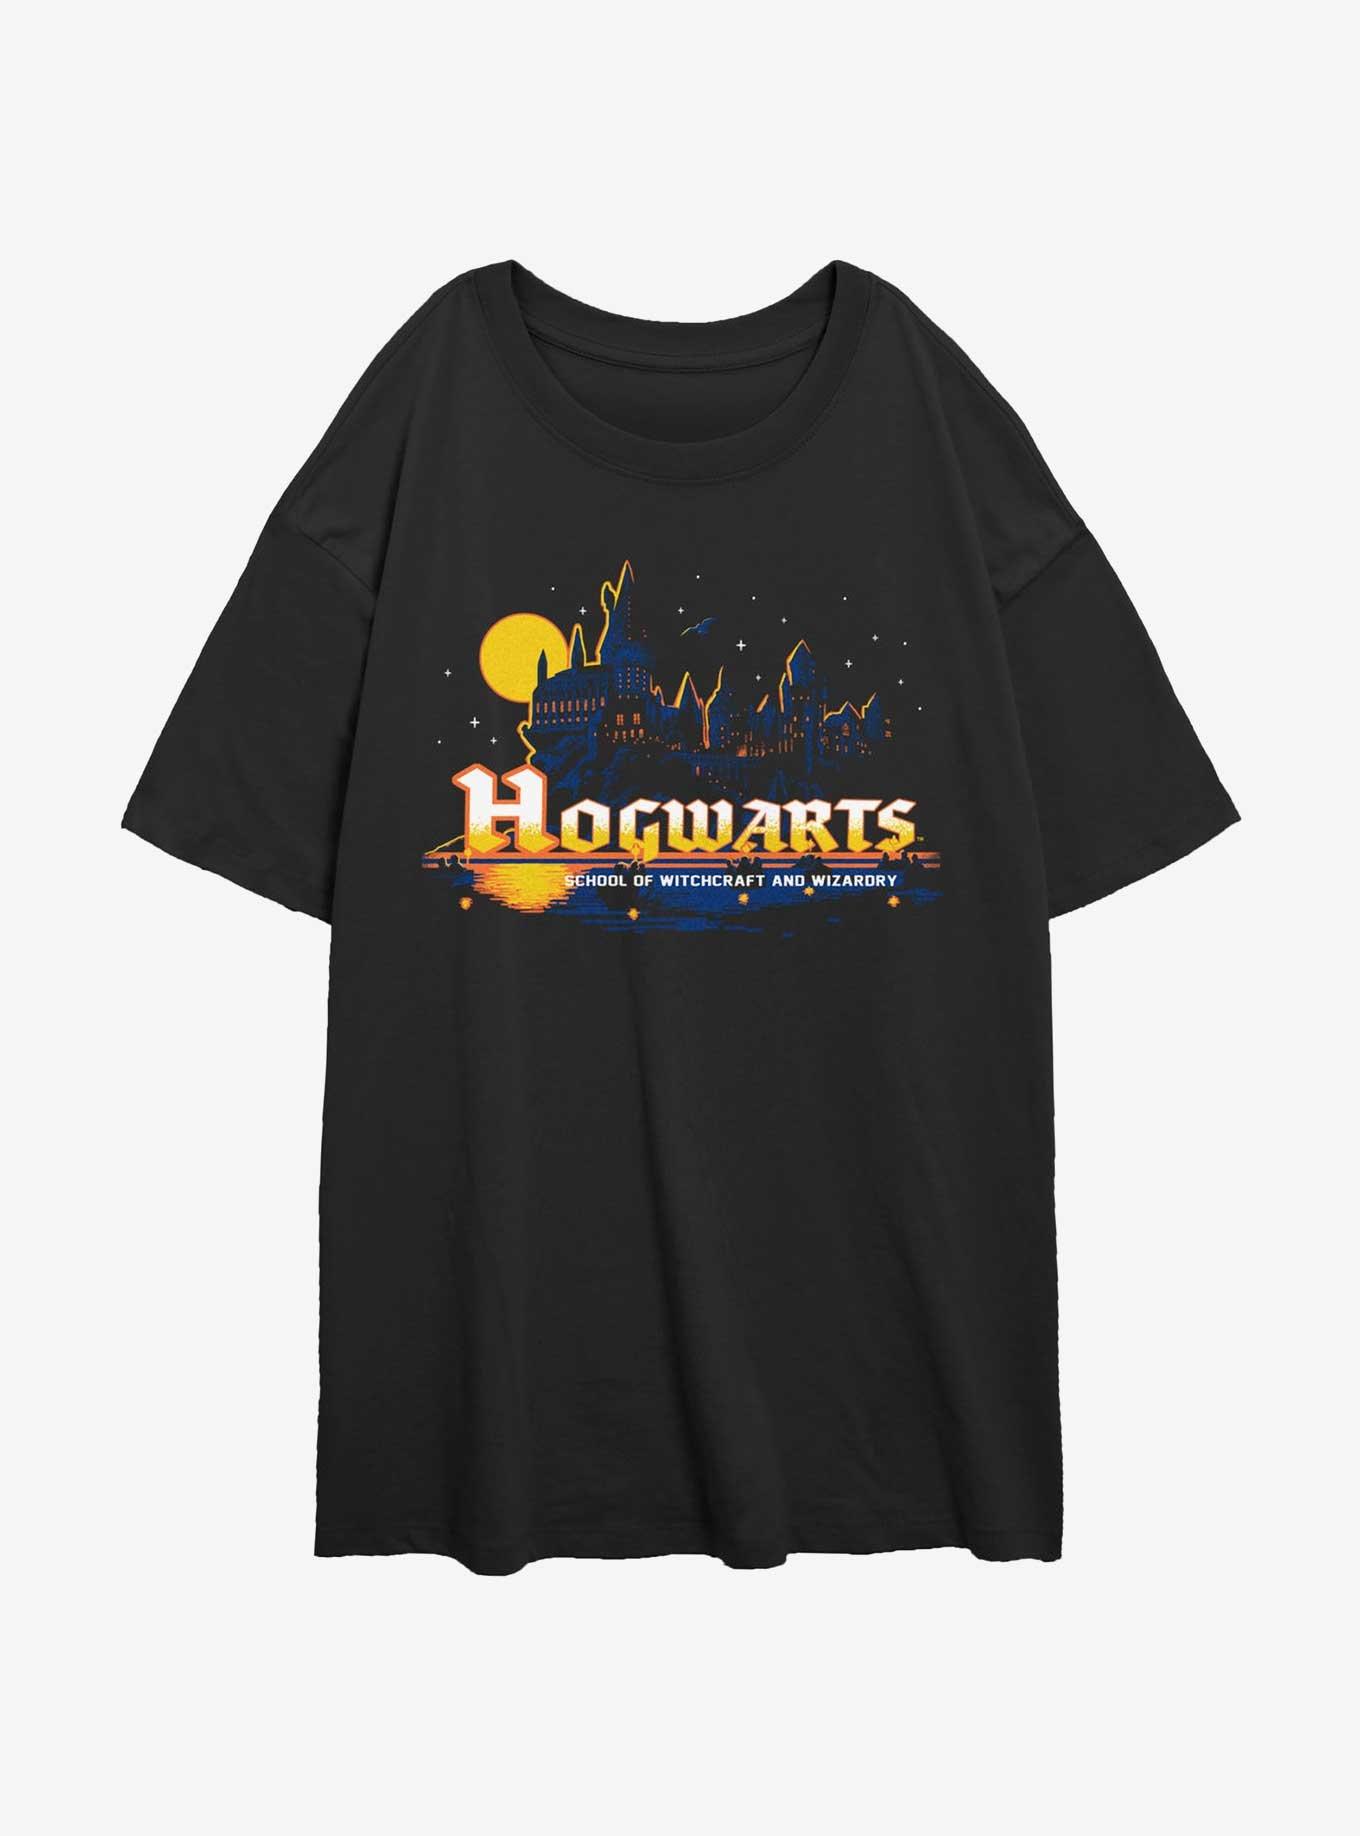 Harry Potter Hogwarts School of Witchcraft and Wizardry Girls Oversized T-Shirt, BLACK, hi-res